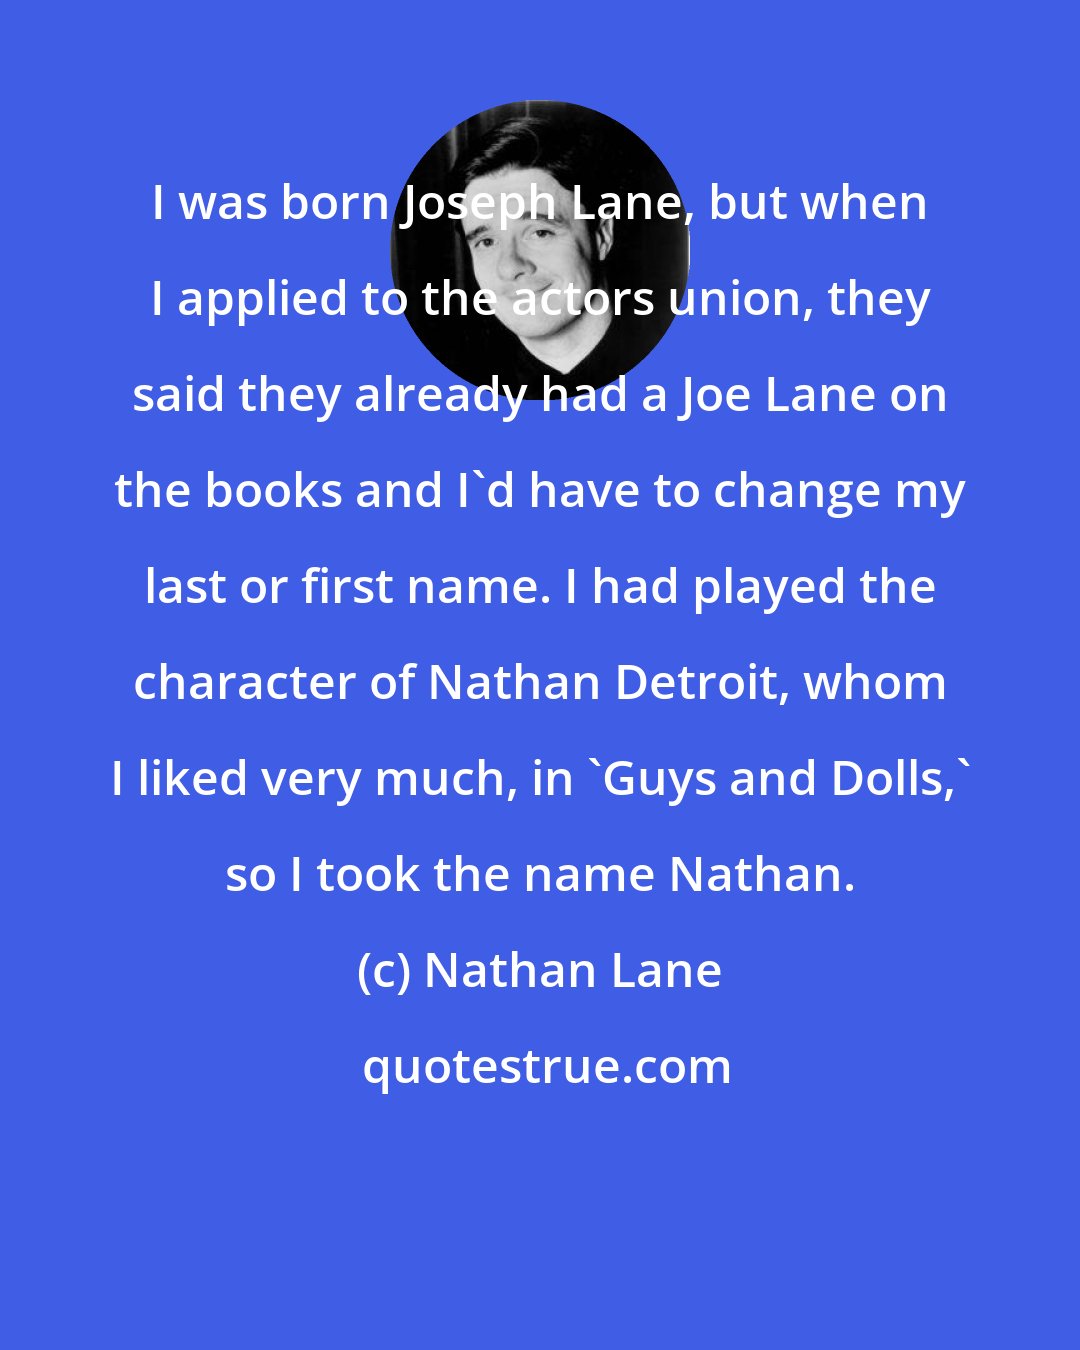 Nathan Lane: I was born Joseph Lane, but when I applied to the actors union, they said they already had a Joe Lane on the books and I'd have to change my last or first name. I had played the character of Nathan Detroit, whom I liked very much, in 'Guys and Dolls,' so I took the name Nathan.